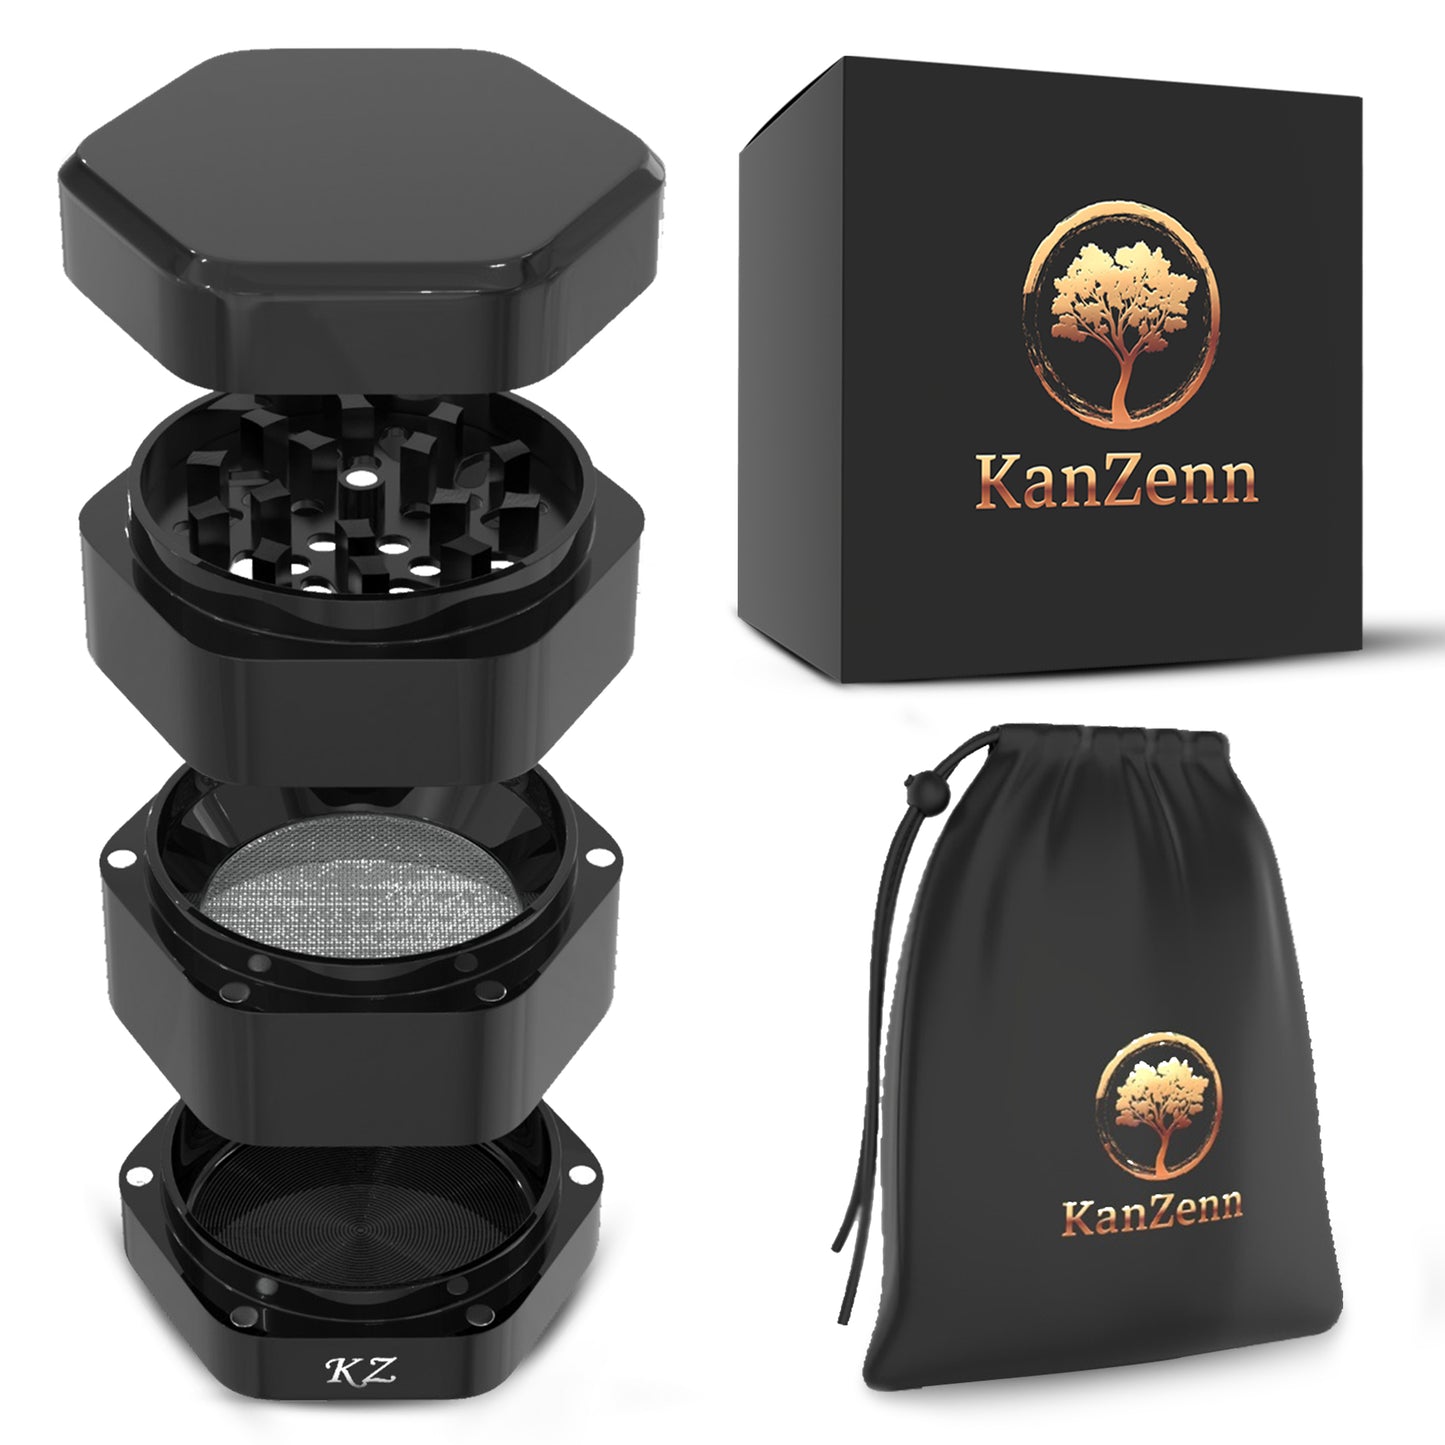 KanZenn 2.5-Inch Manual Spice Grinder - Durable Aluminum Alloy, Lightweight and Portable Hexagon Shape, Includes Cleaning Tool, Travel Bag & Gift Box, Black